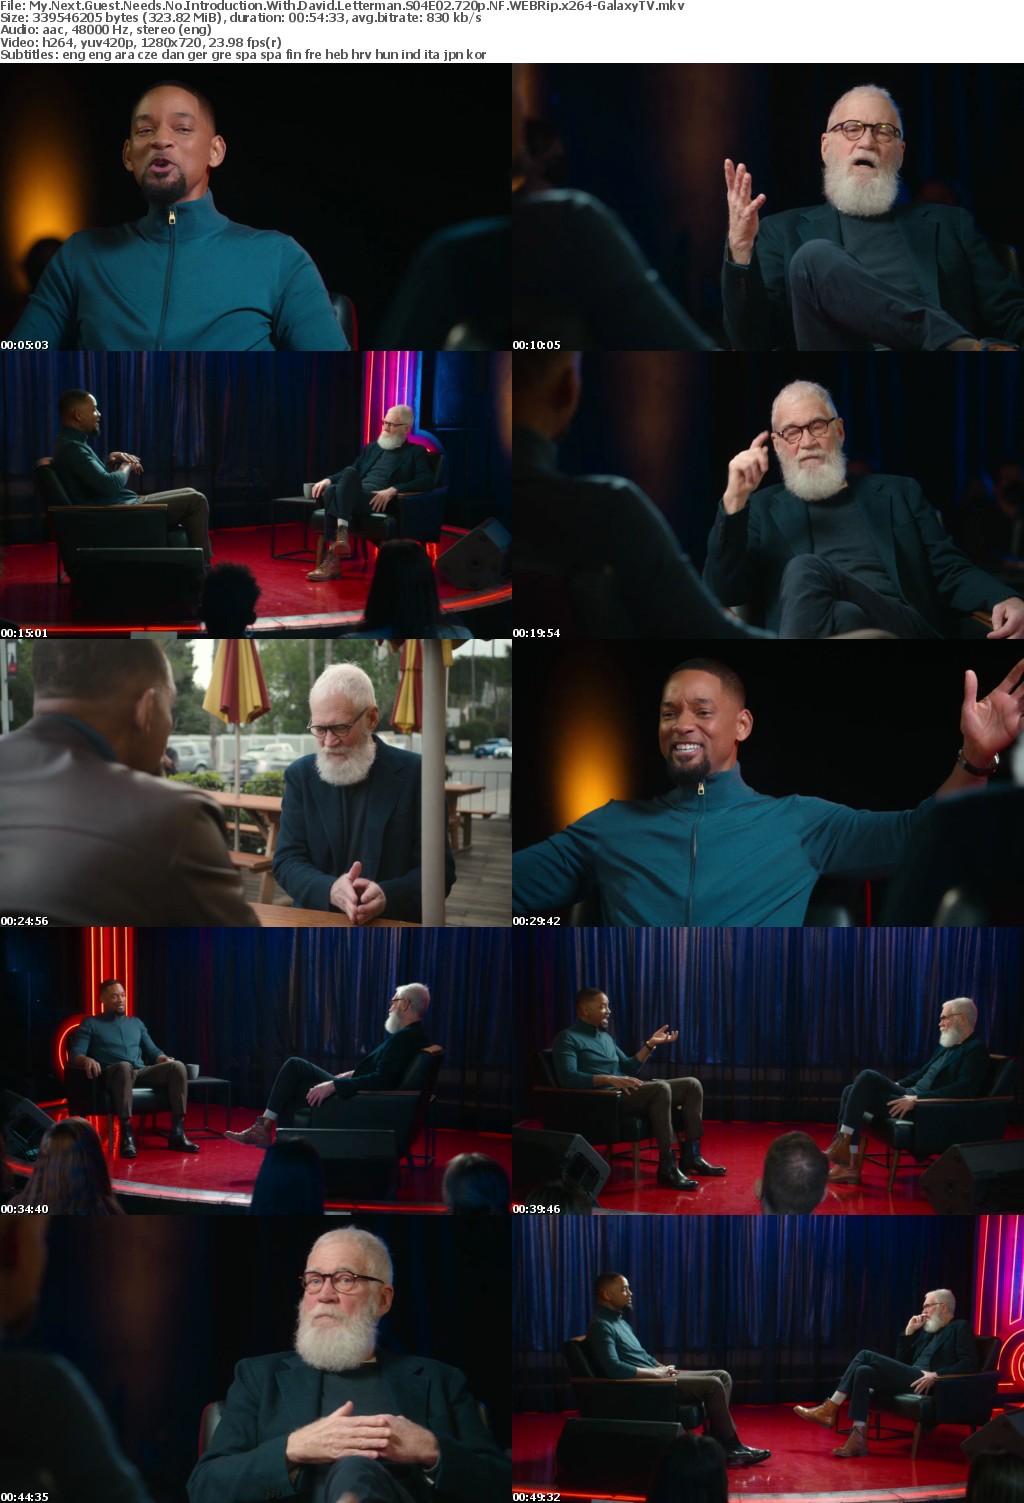 My Next Guest Needs No Introduction With David Letterman S04 COMPLETE 720p NF WEBRip x264-GalaxyTV